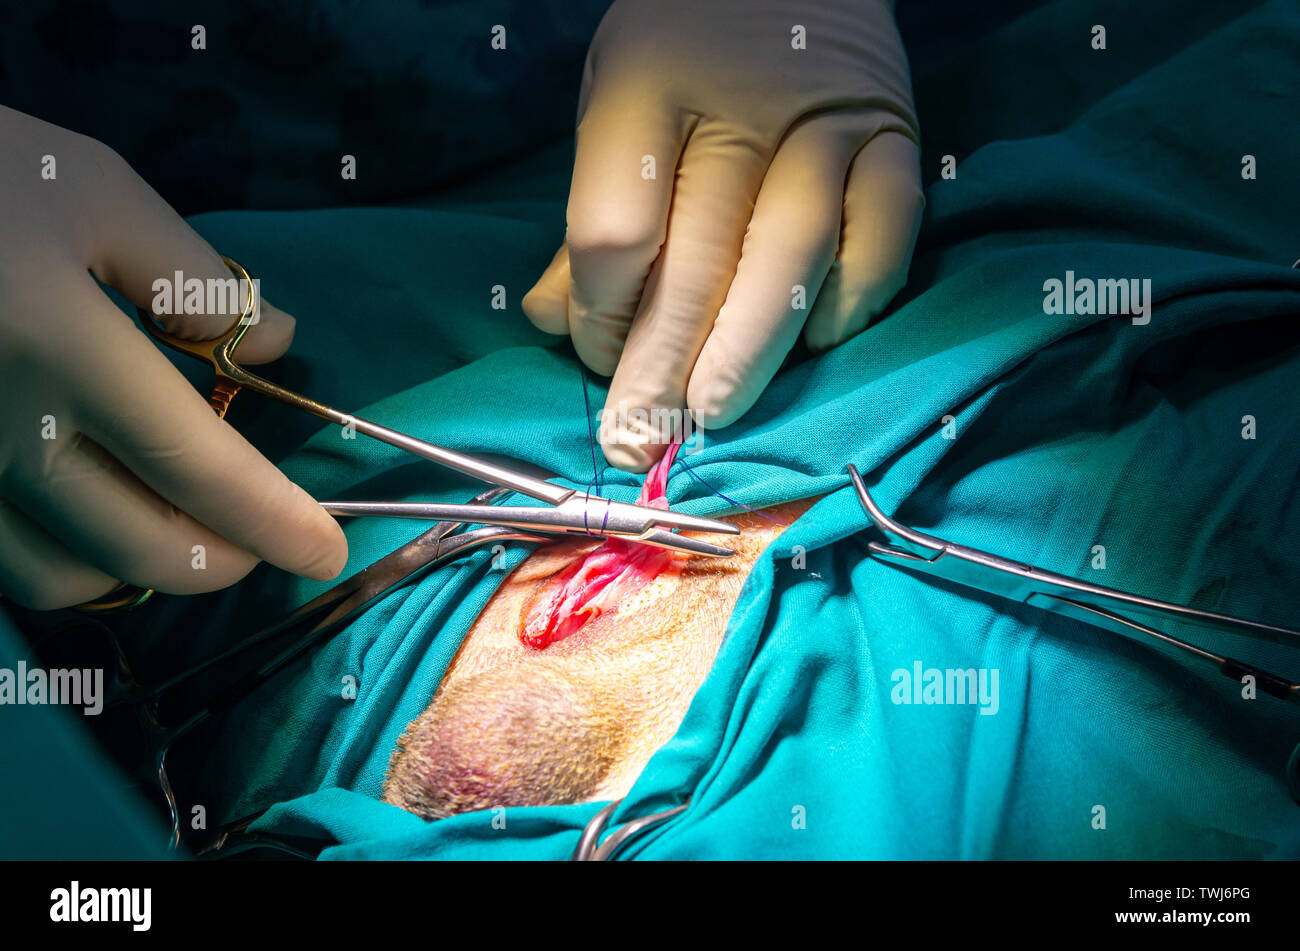 Ligation of the vas deferens and its vessels by a veterinarian Stock Photo